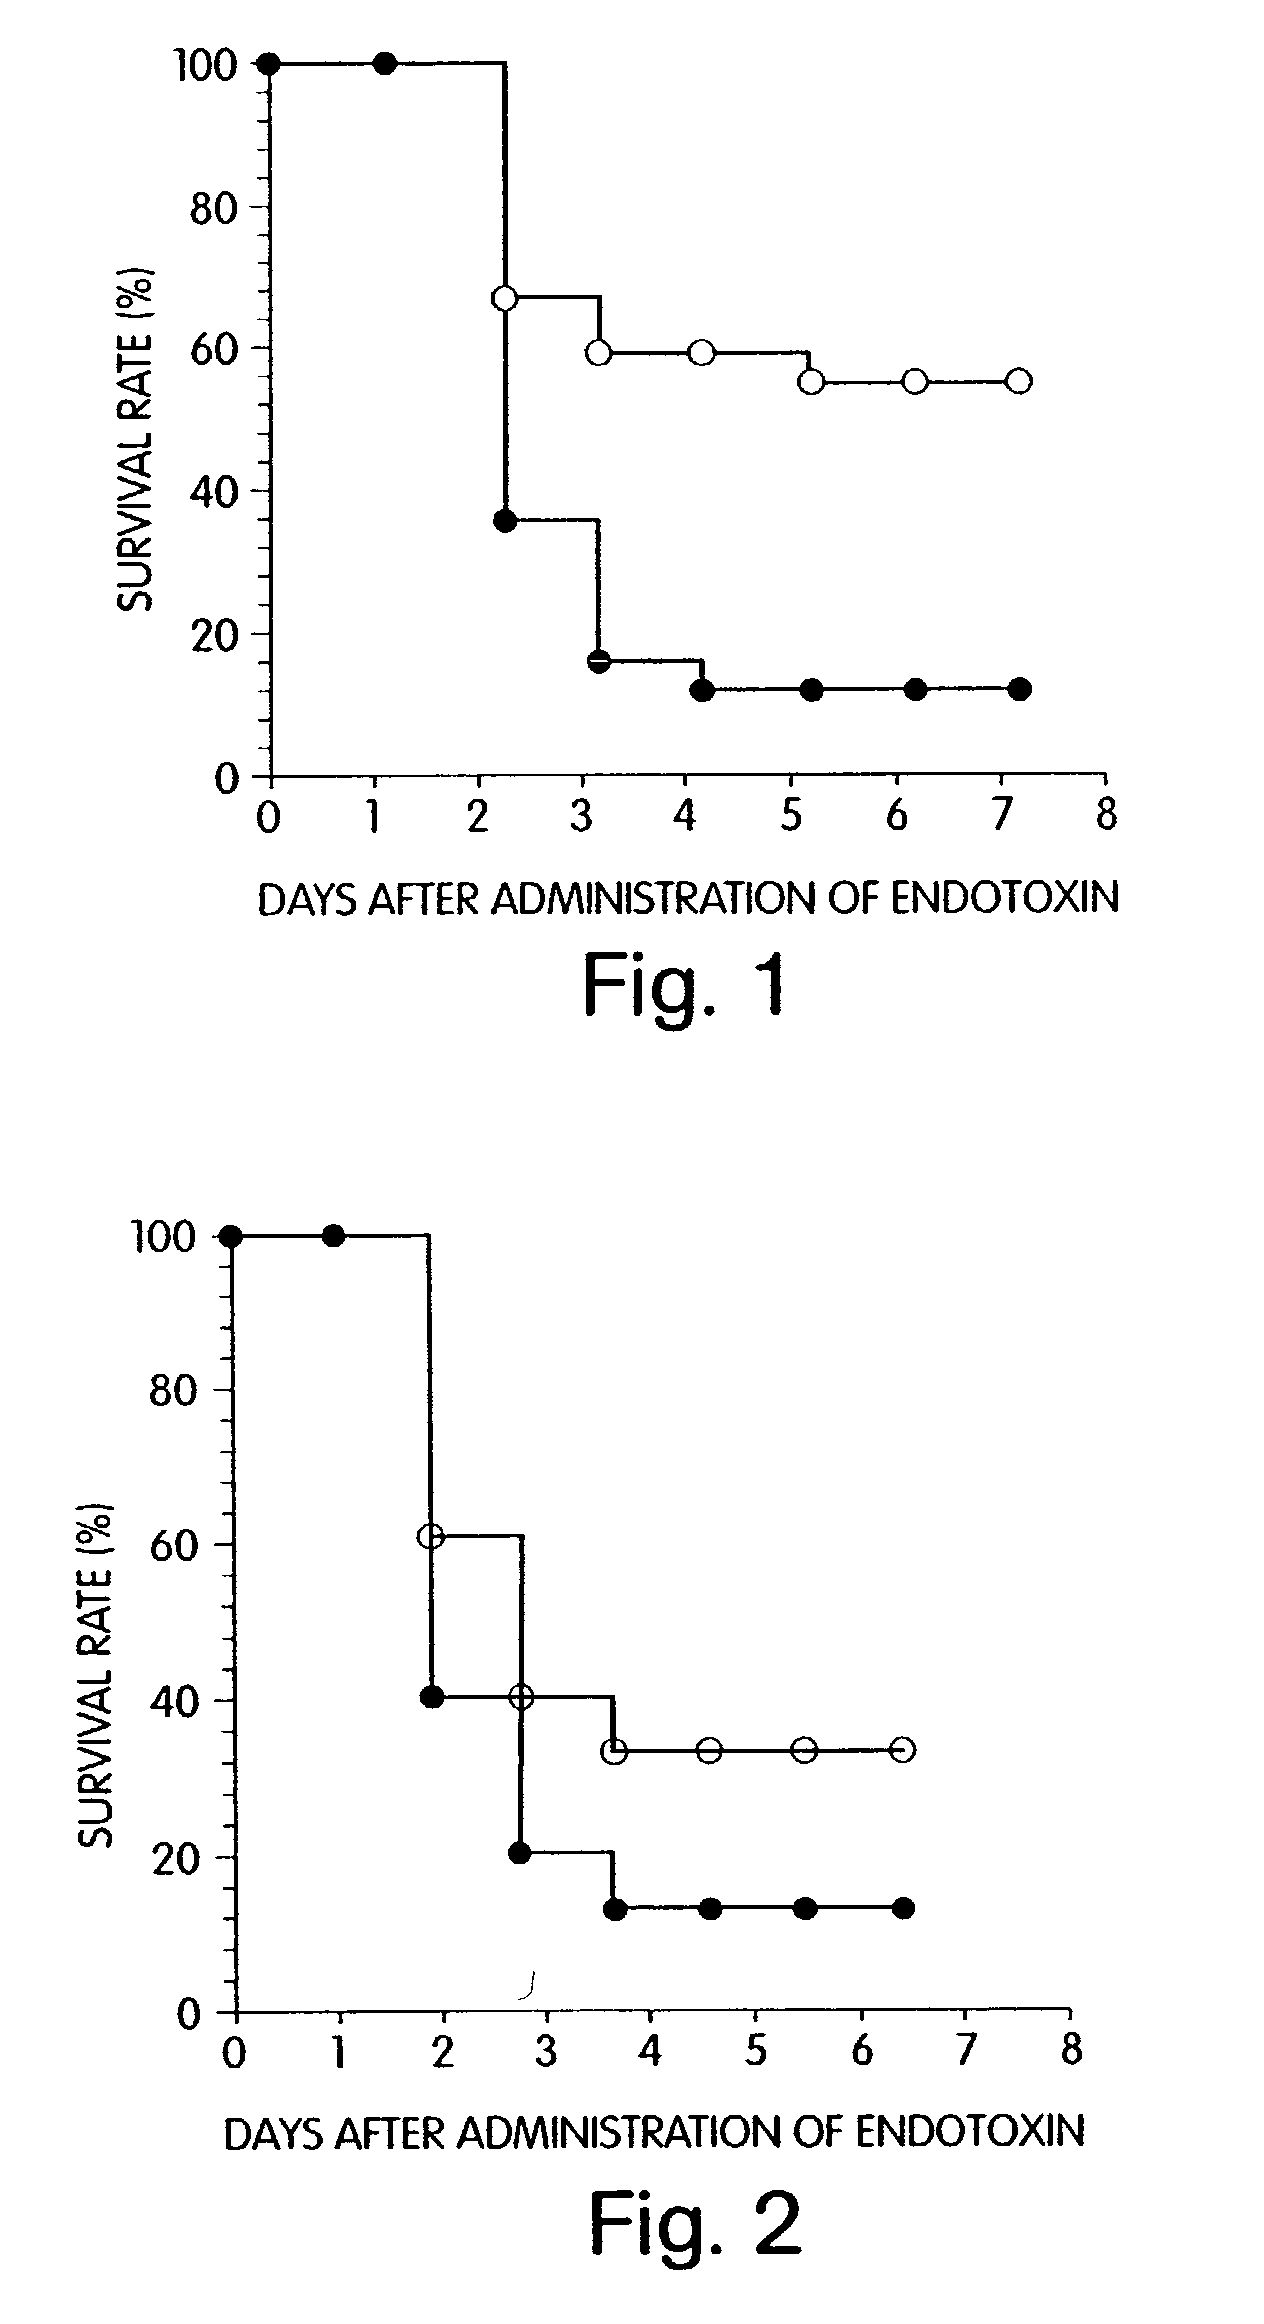 Agent for preventing and/or treating multiple organ failure